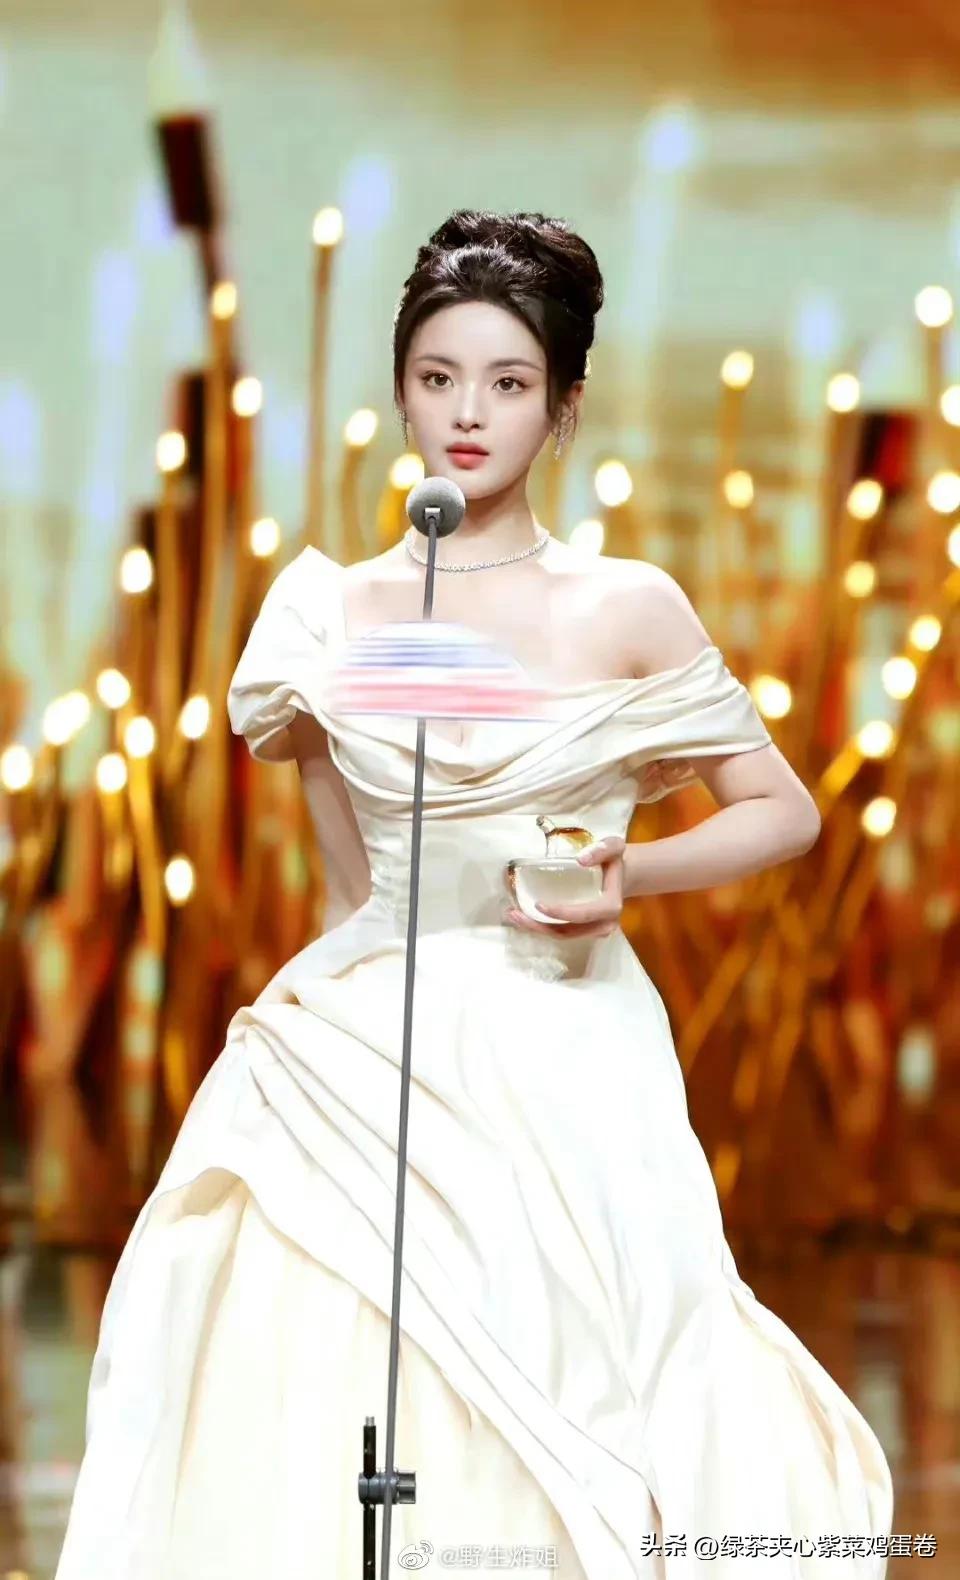 The picture of the infield actress in the quality ceremony, Tong Yao ...